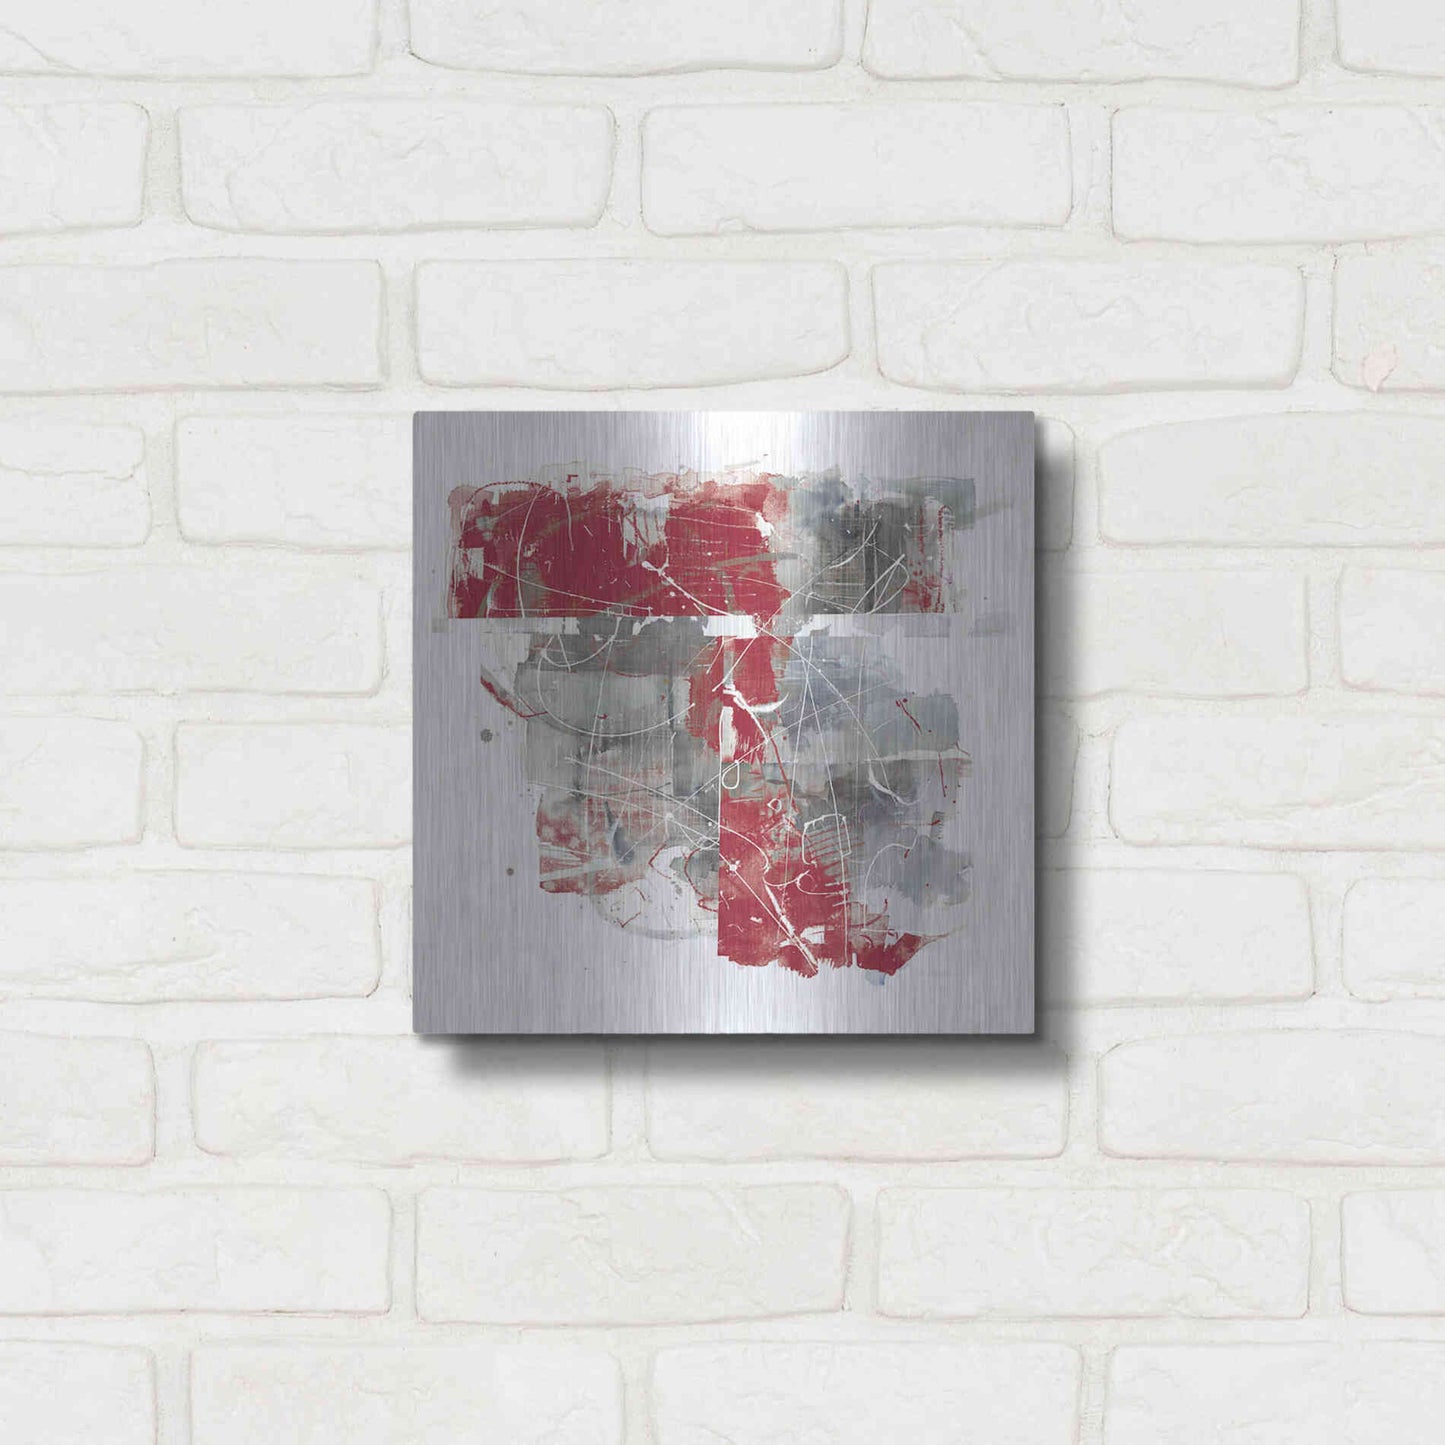 Luxe Metal Art 'Moving In And Out Of Traffic II Red Grey' by Mike Schick, Metal Wall Art,12x12